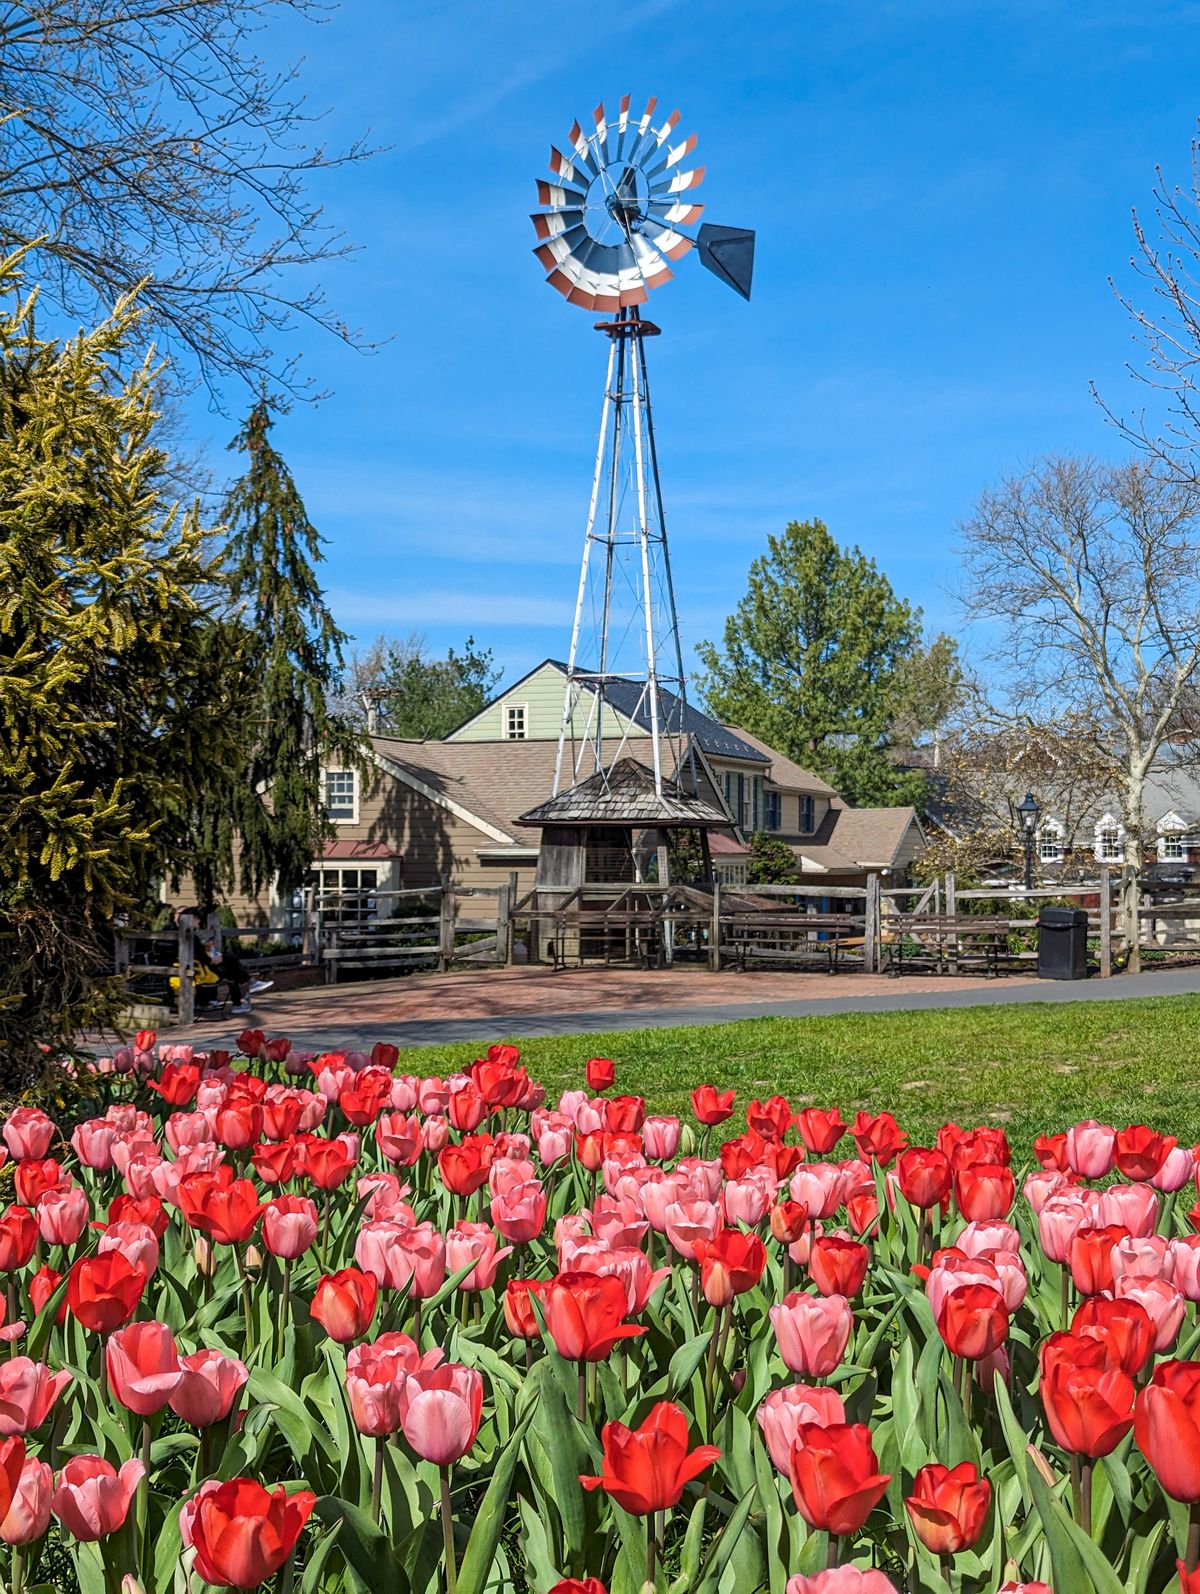 Tulips in bloom by a windmill at peddlers village.